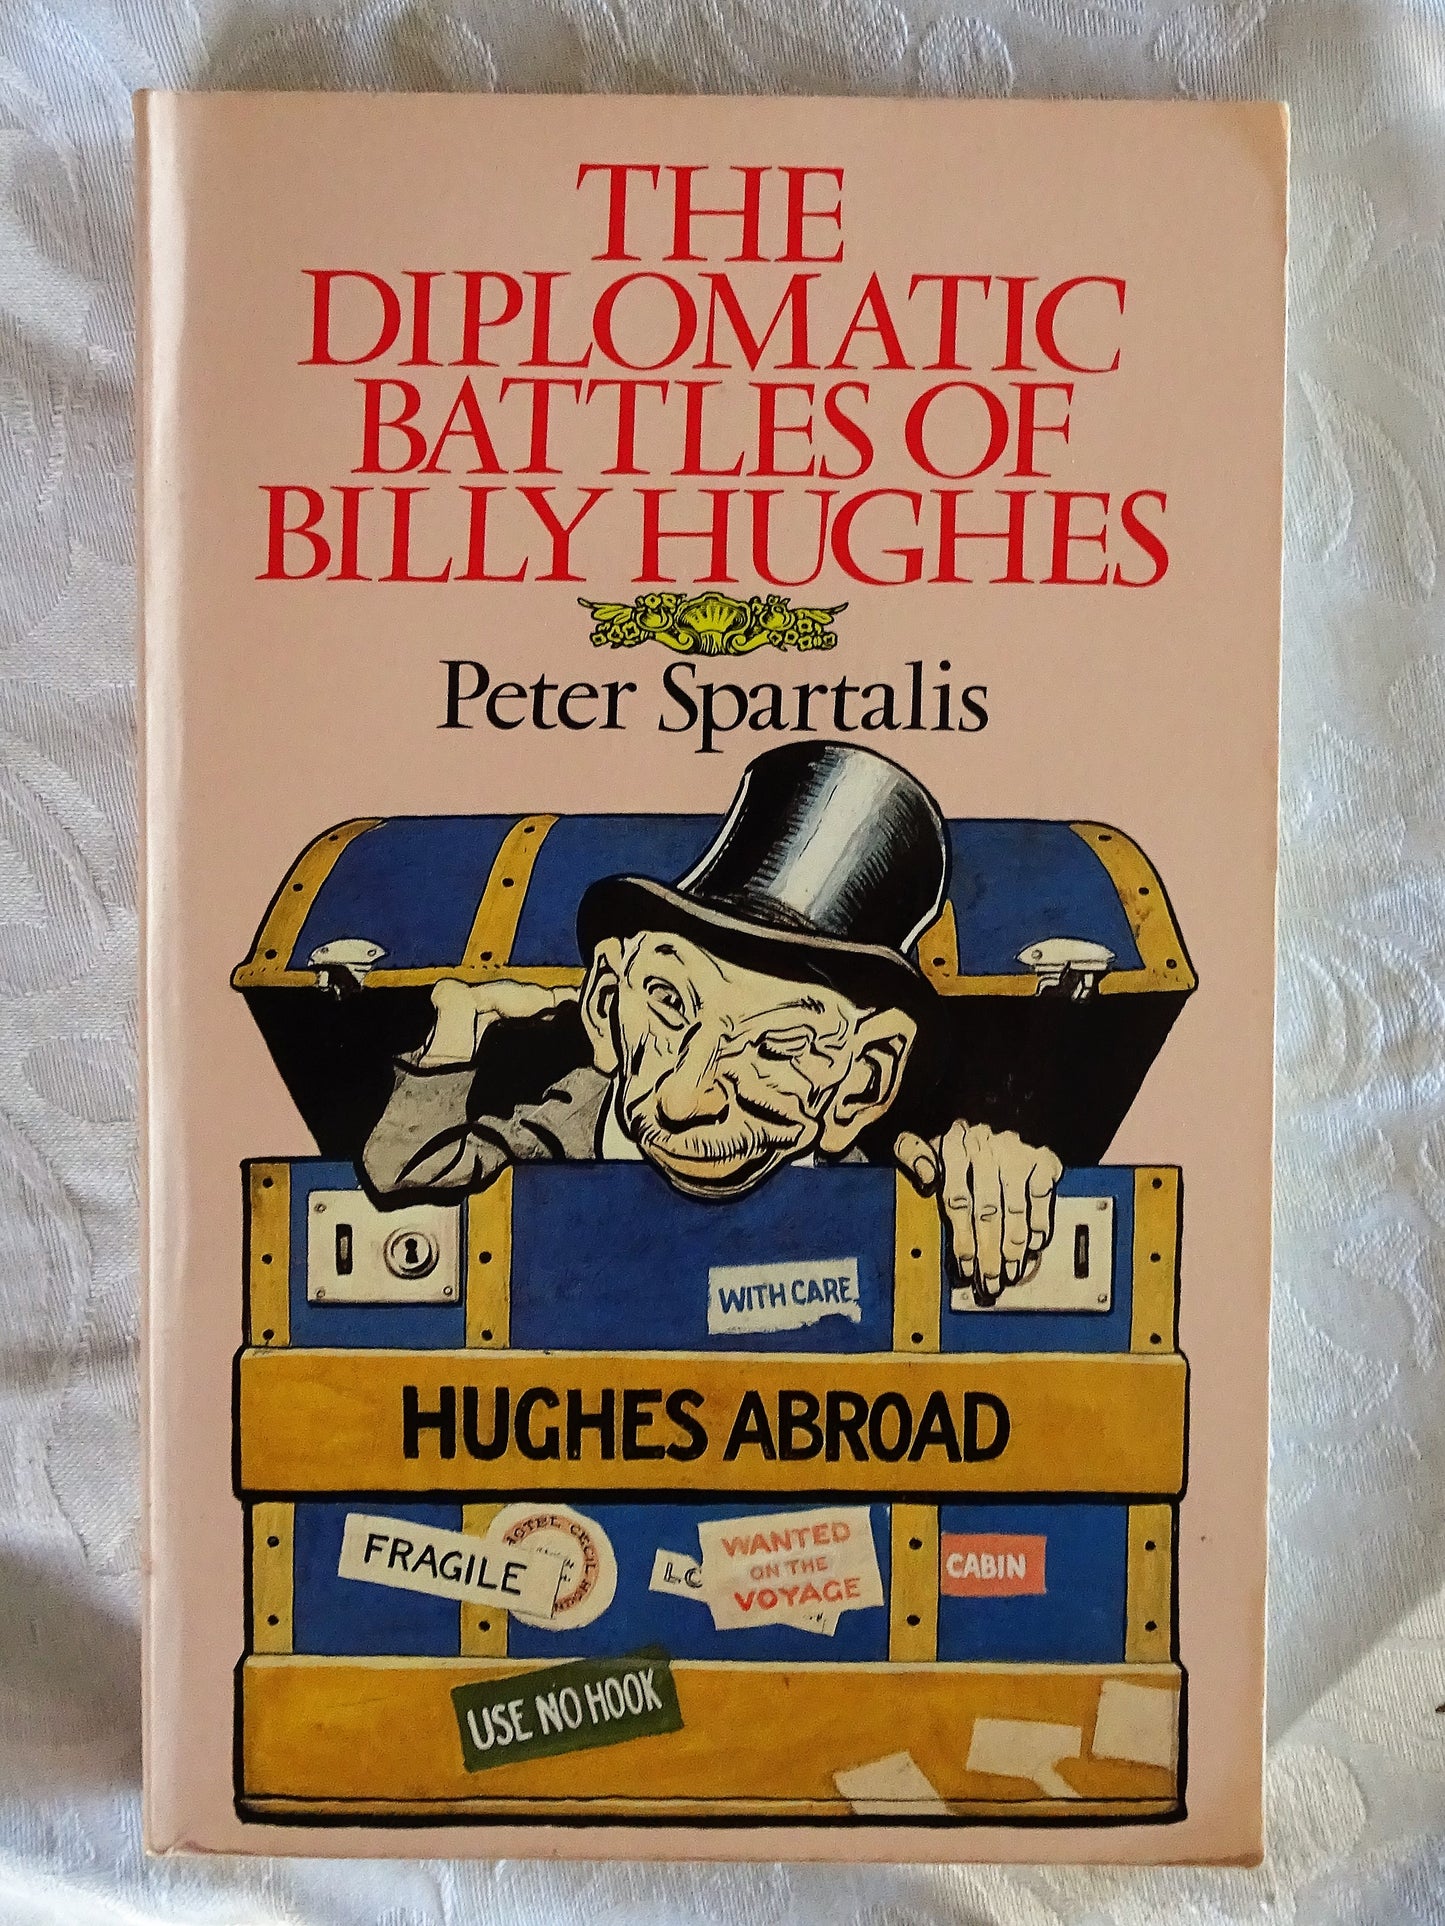 The Diplomatic Battles of Billy Hughes by Peter Spartalis